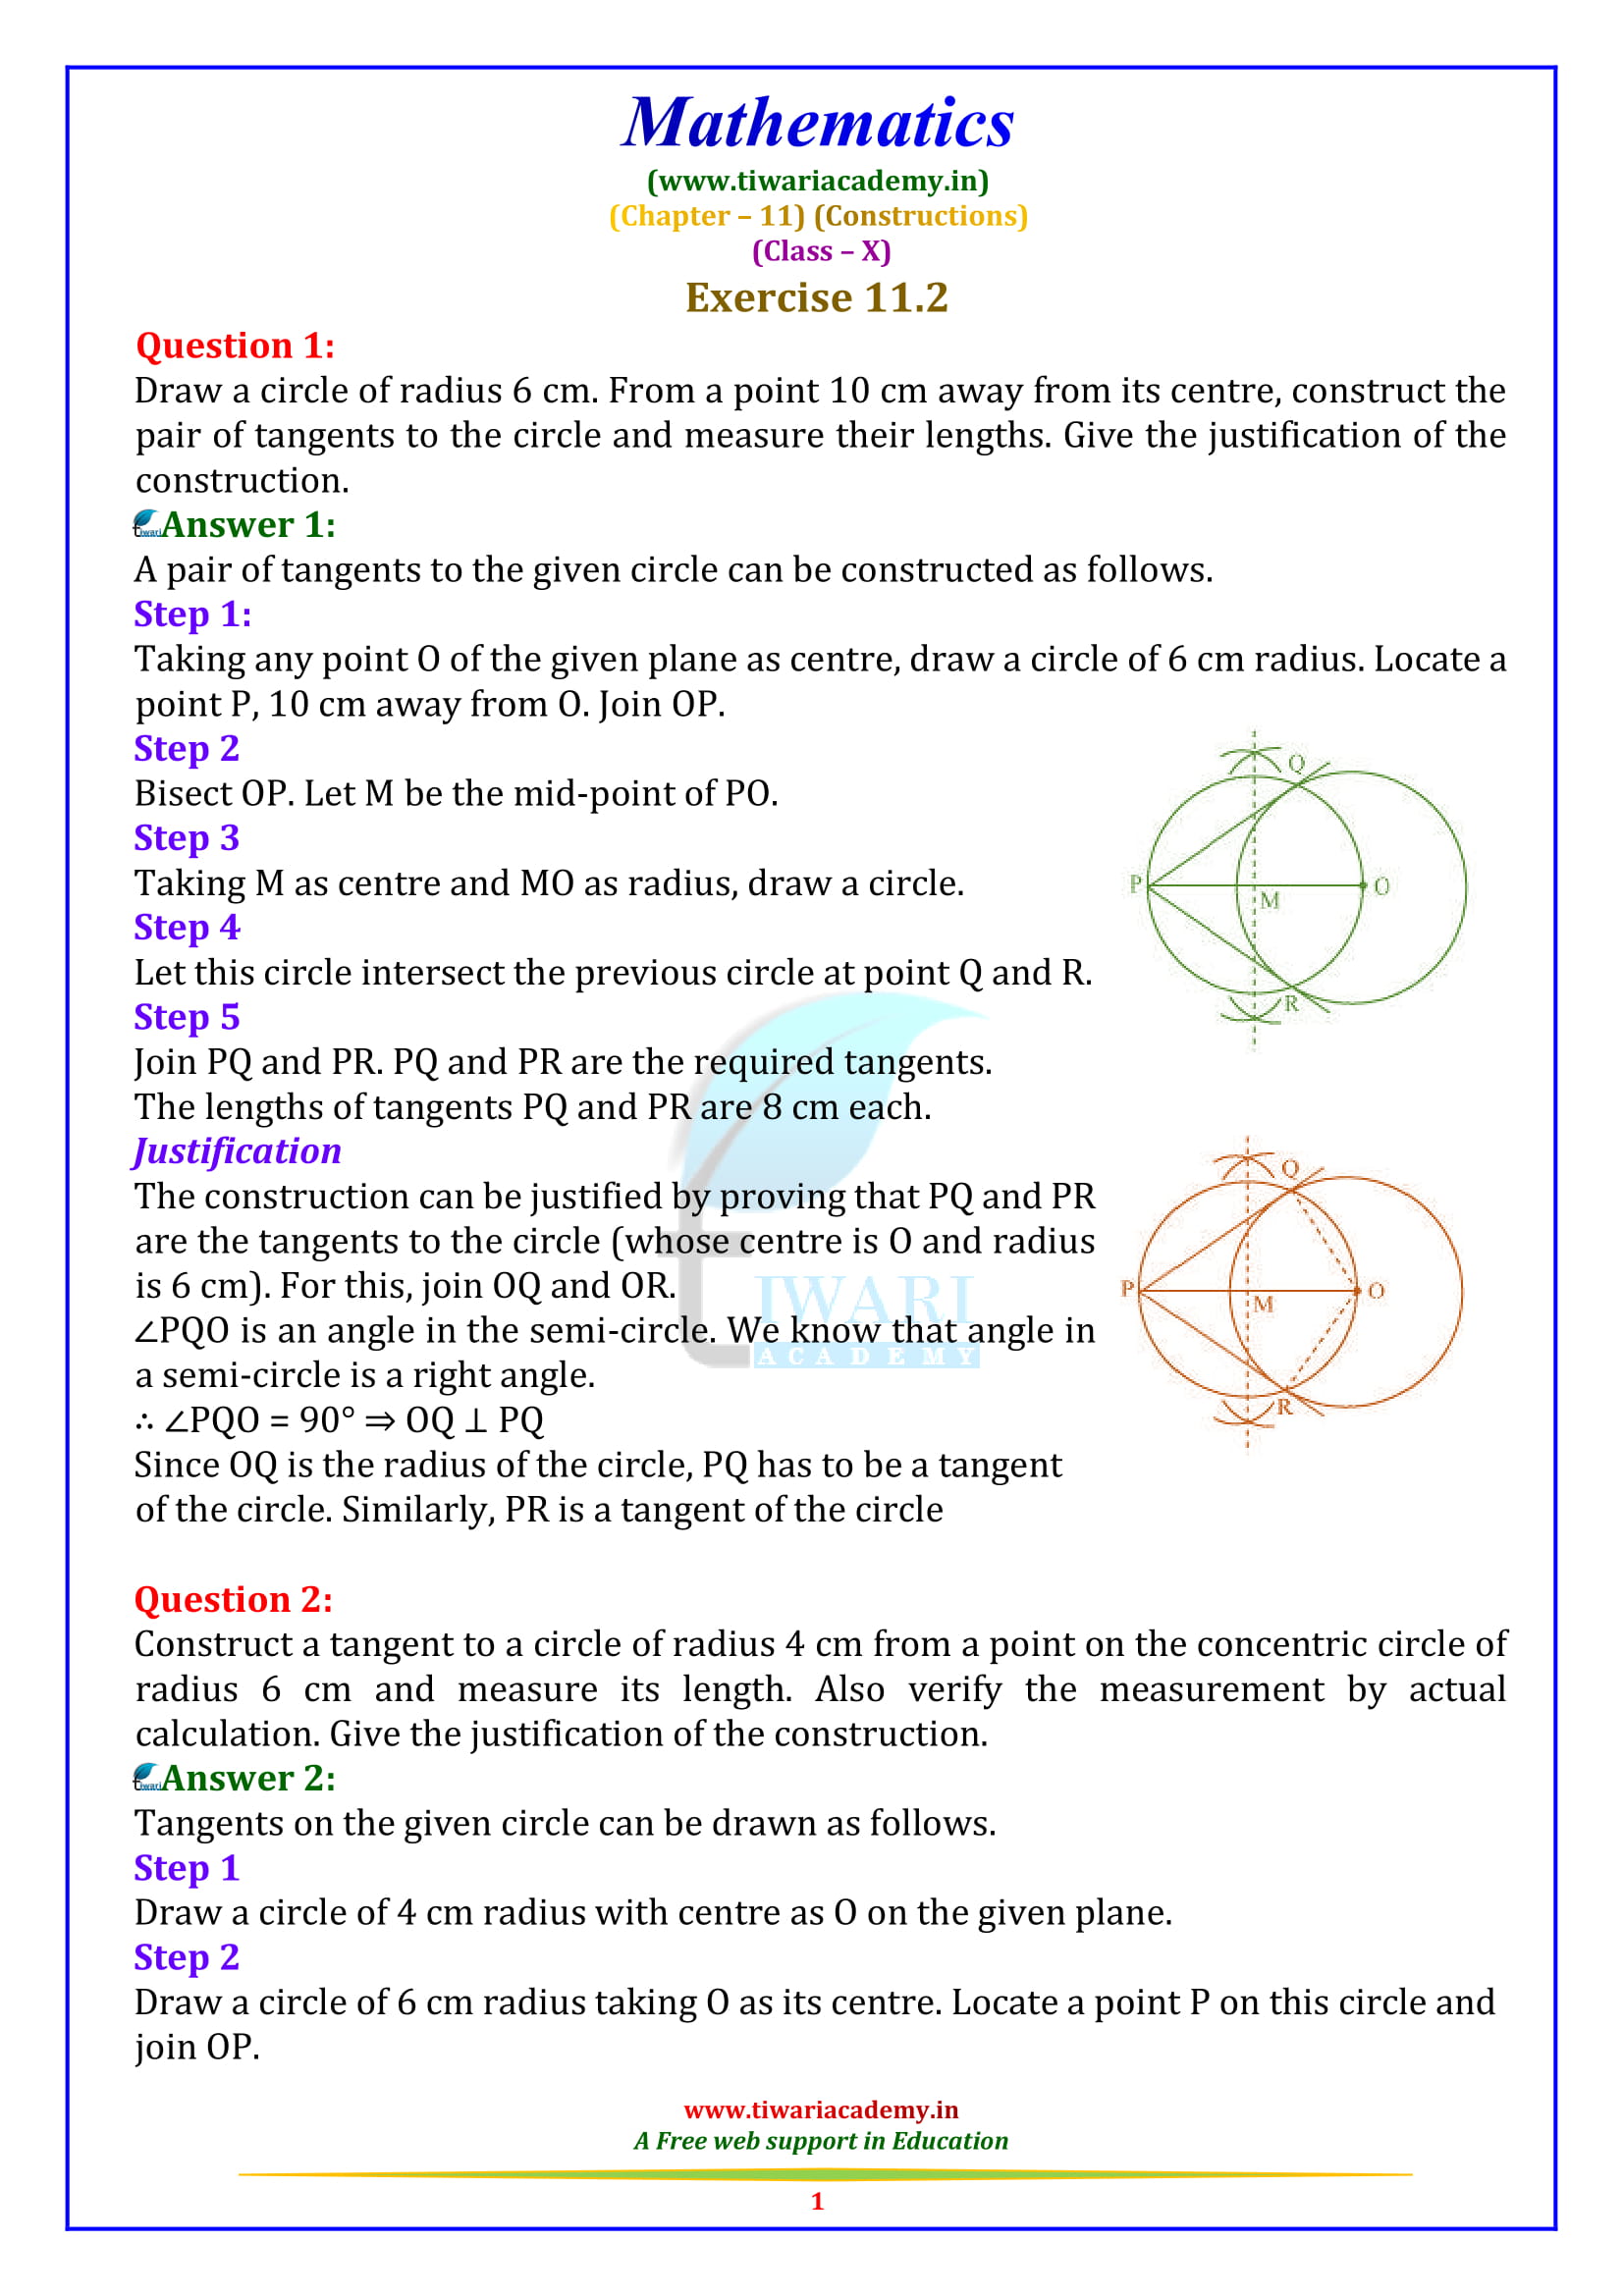 NCERT Solutions for Class 10 Maths Chapter 11 Exercise 11.2 Constructions